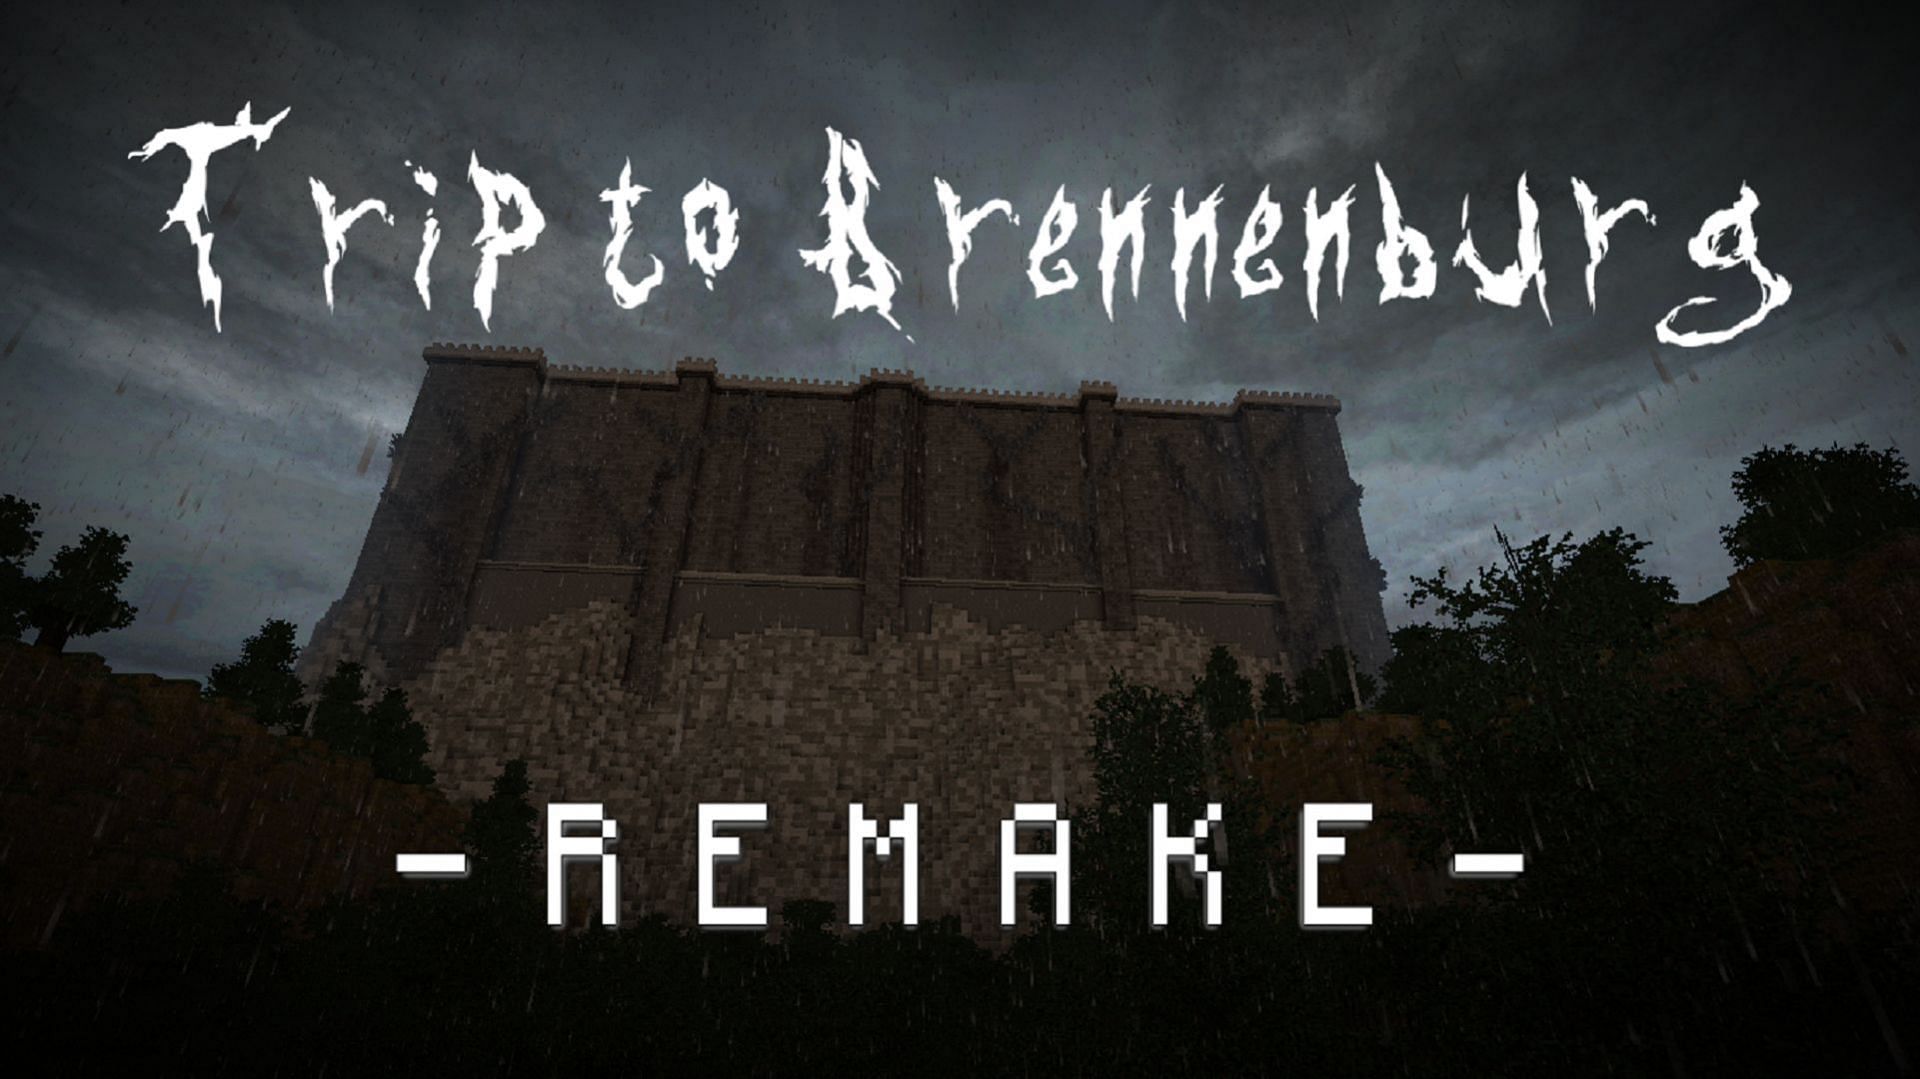 Trip to Brennenburg pits Minecraft fans against the horrors in an ancient Prussian castle (Image LGSC Team)